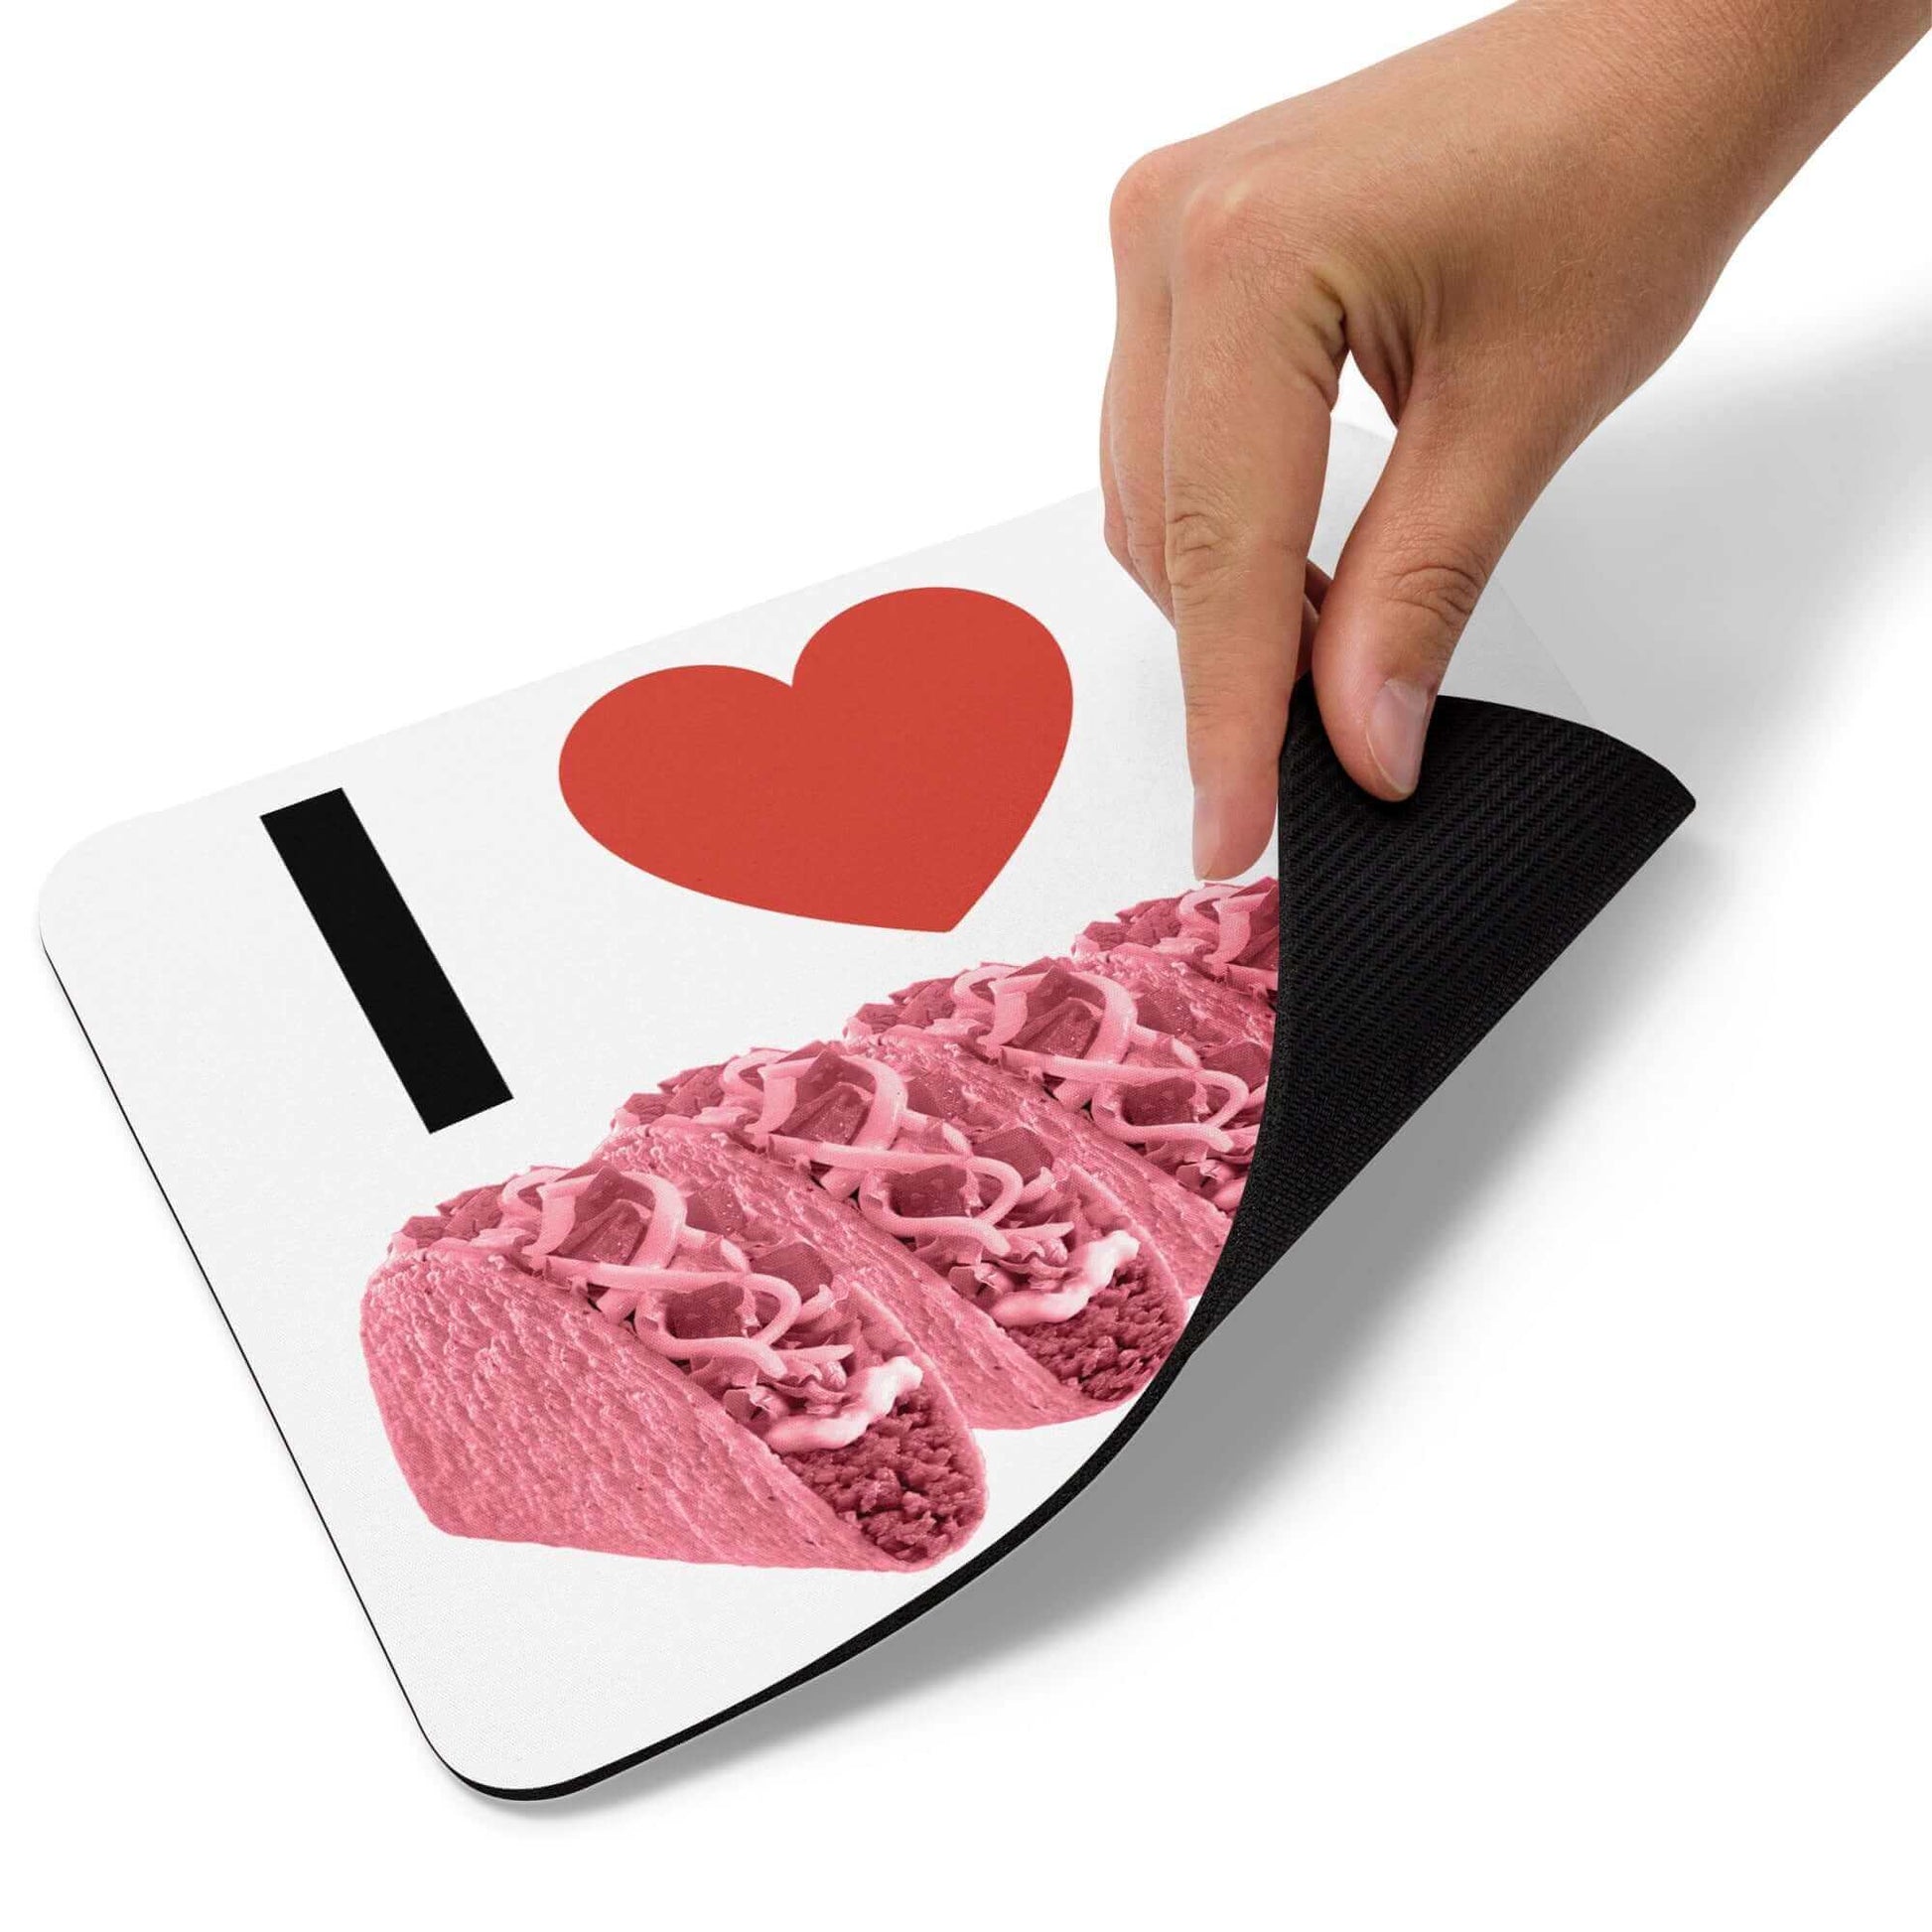 I LOVE pink tacos - Mouse pad bearded clam fathers day funny mouse pad gift for him lady parts meat flaps pink taco pussy vagina